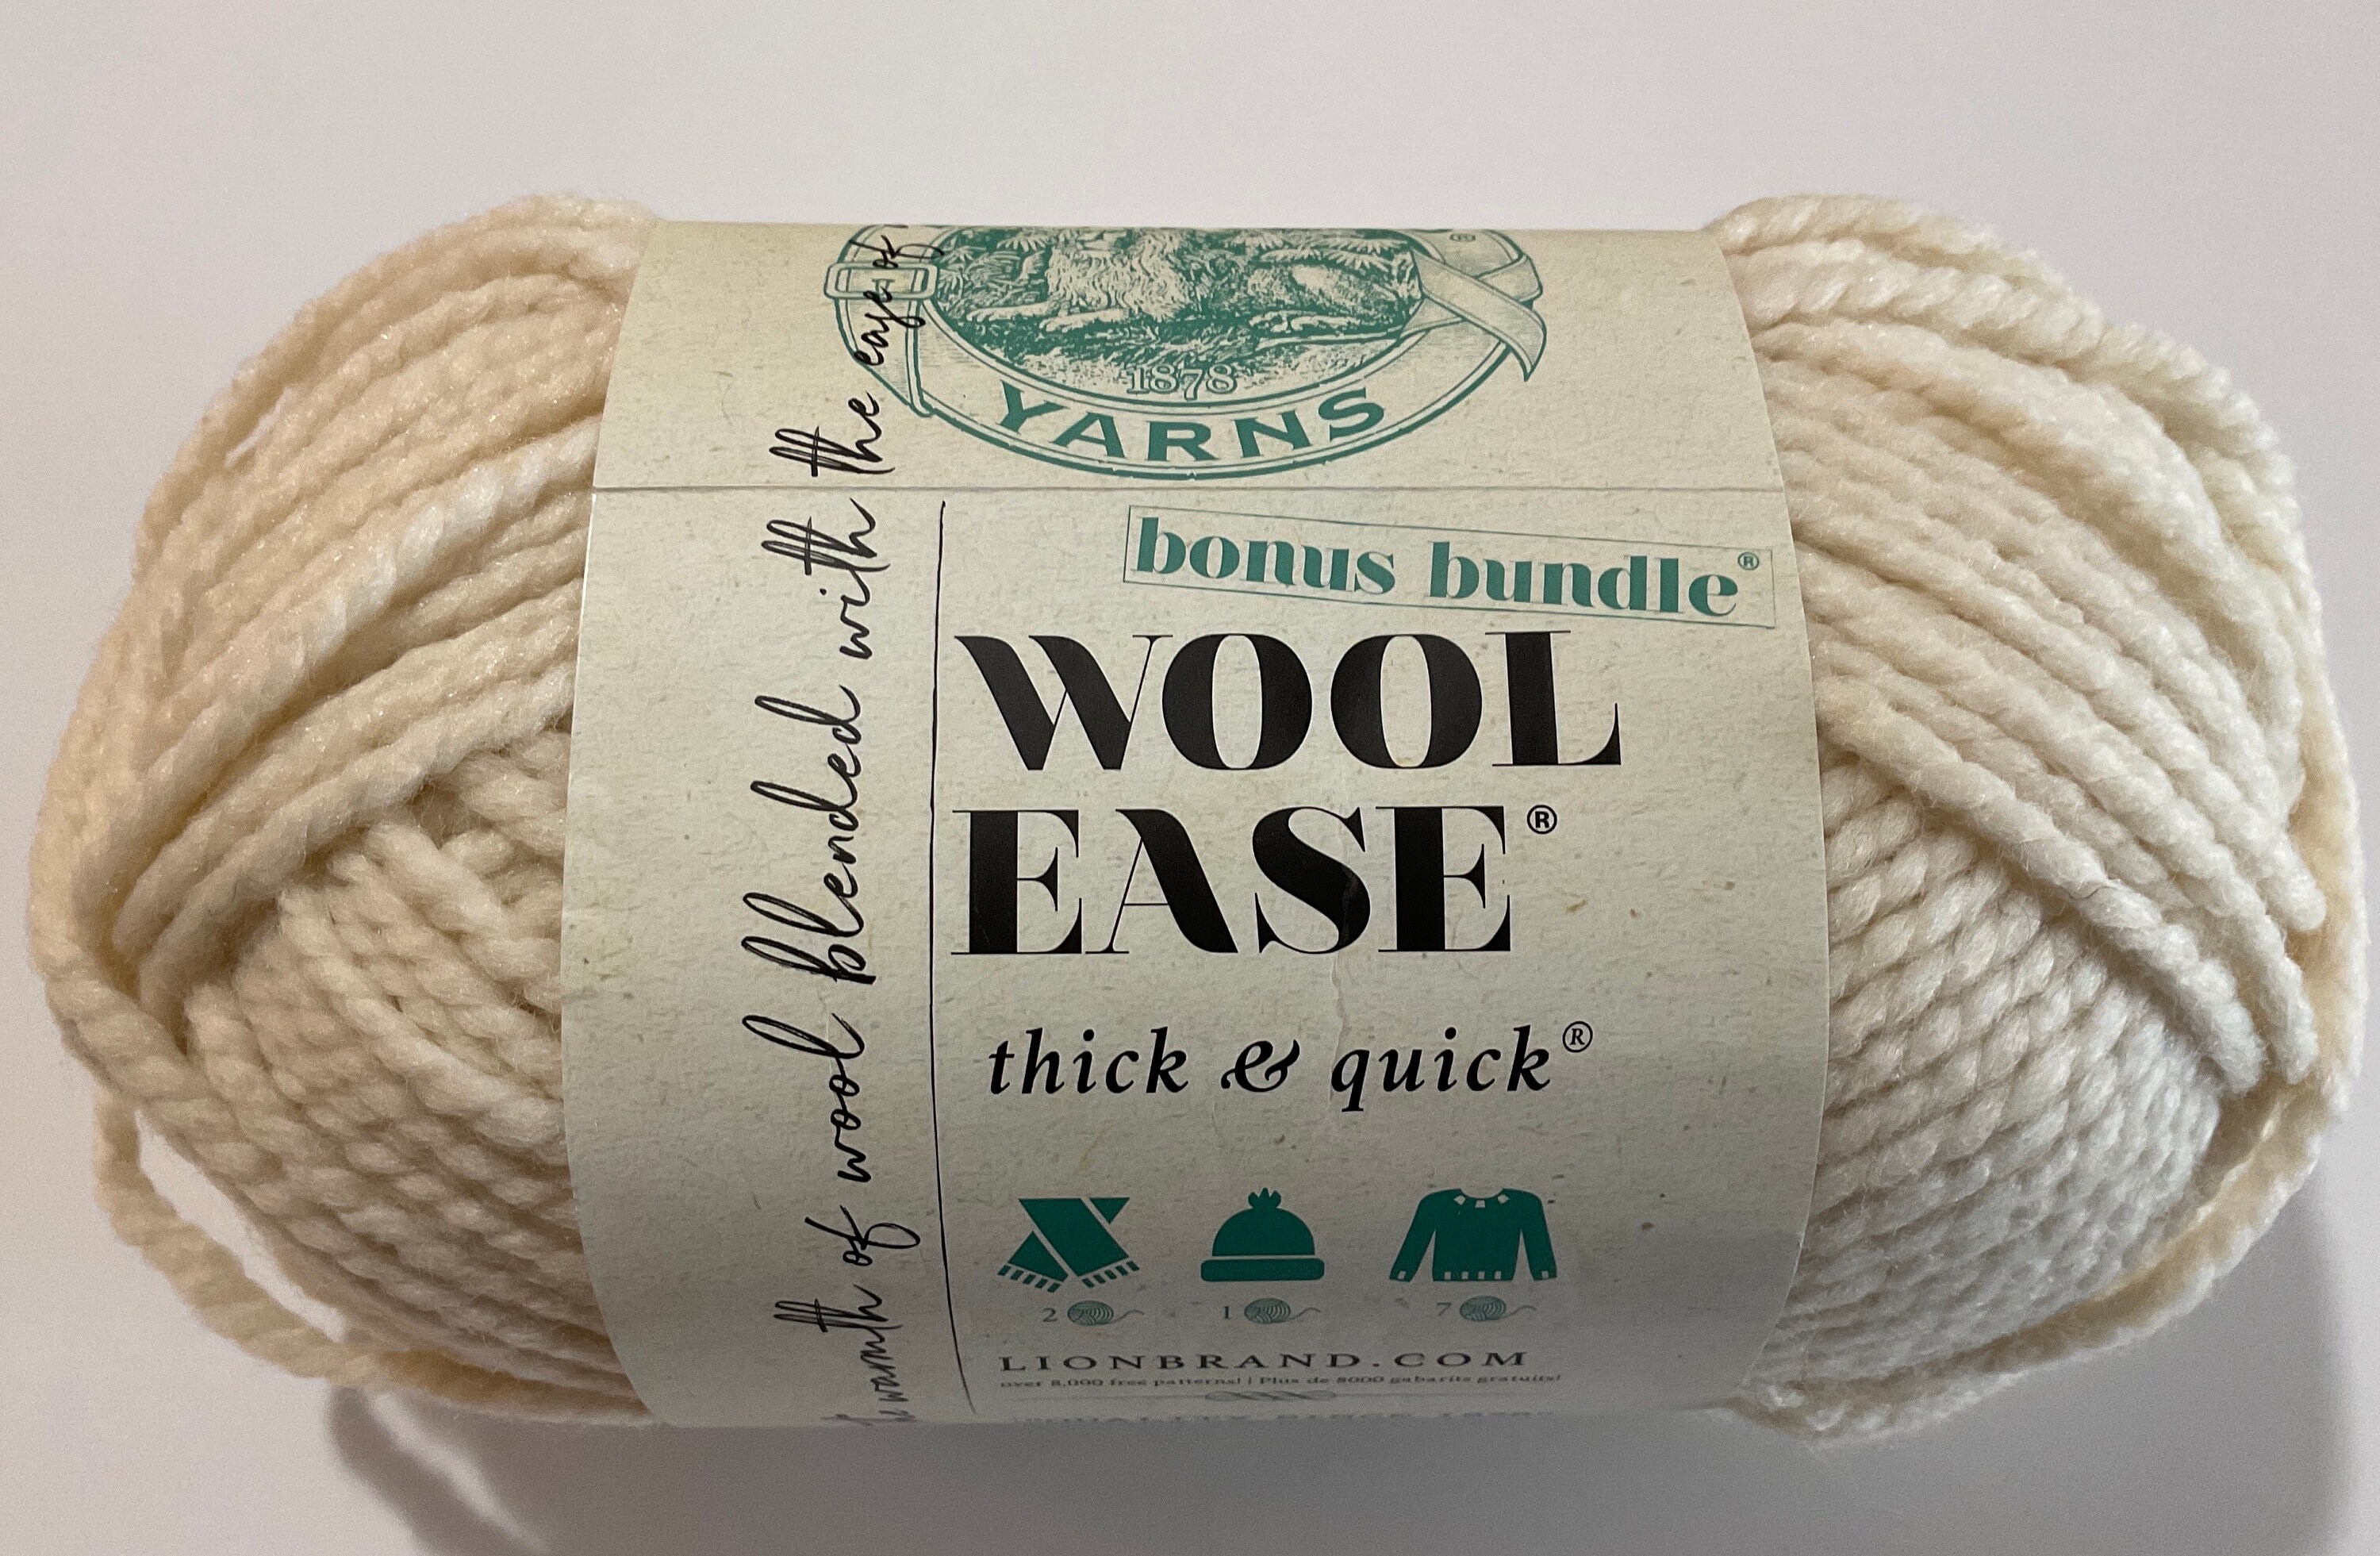 Lion Brand Wool Ease Thick & Quick Yarn, Fossil lot of 2 